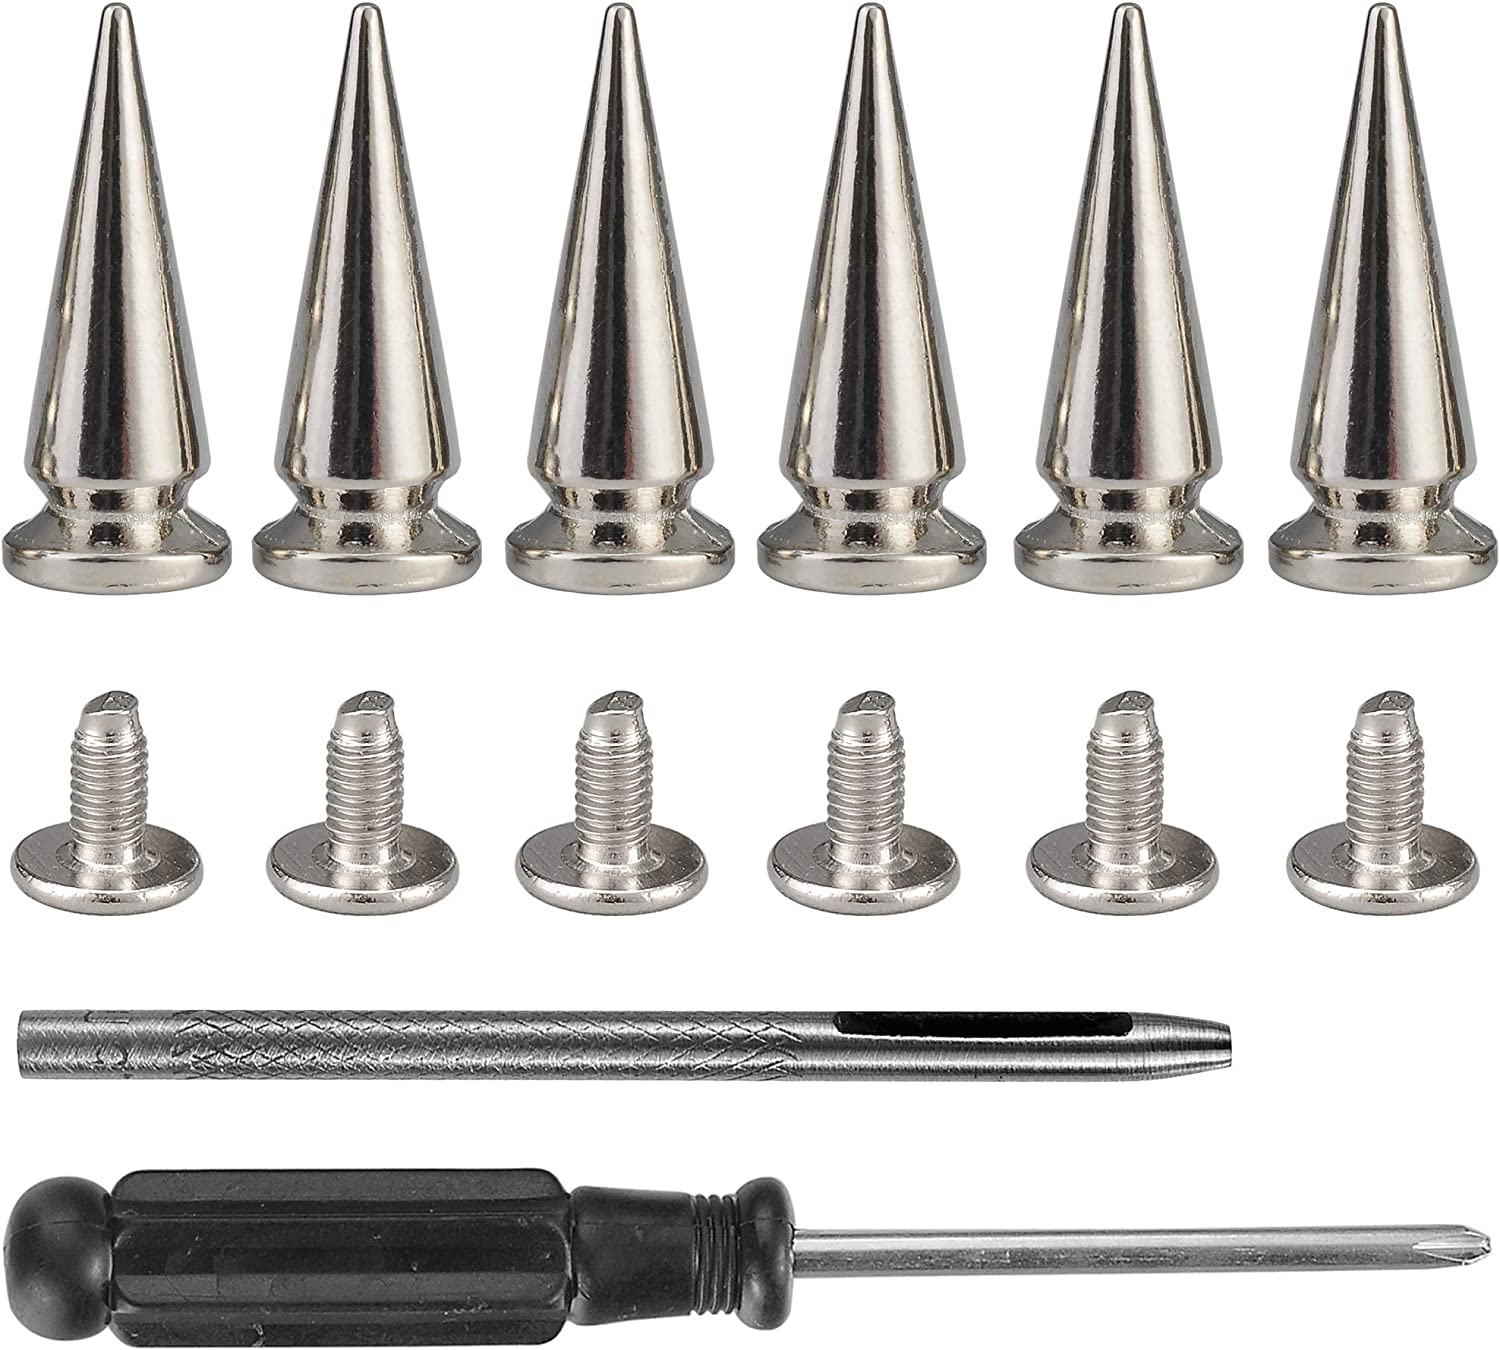  Bastex 205pcs Studs and Spikes. Metal Spikes and Punk Studs for  Clothing, Jacket Studs. Cone Small Metal Studs and Metal Spikes for DIY  Leather Craft. Includes Bullet Cone Spike and Metal